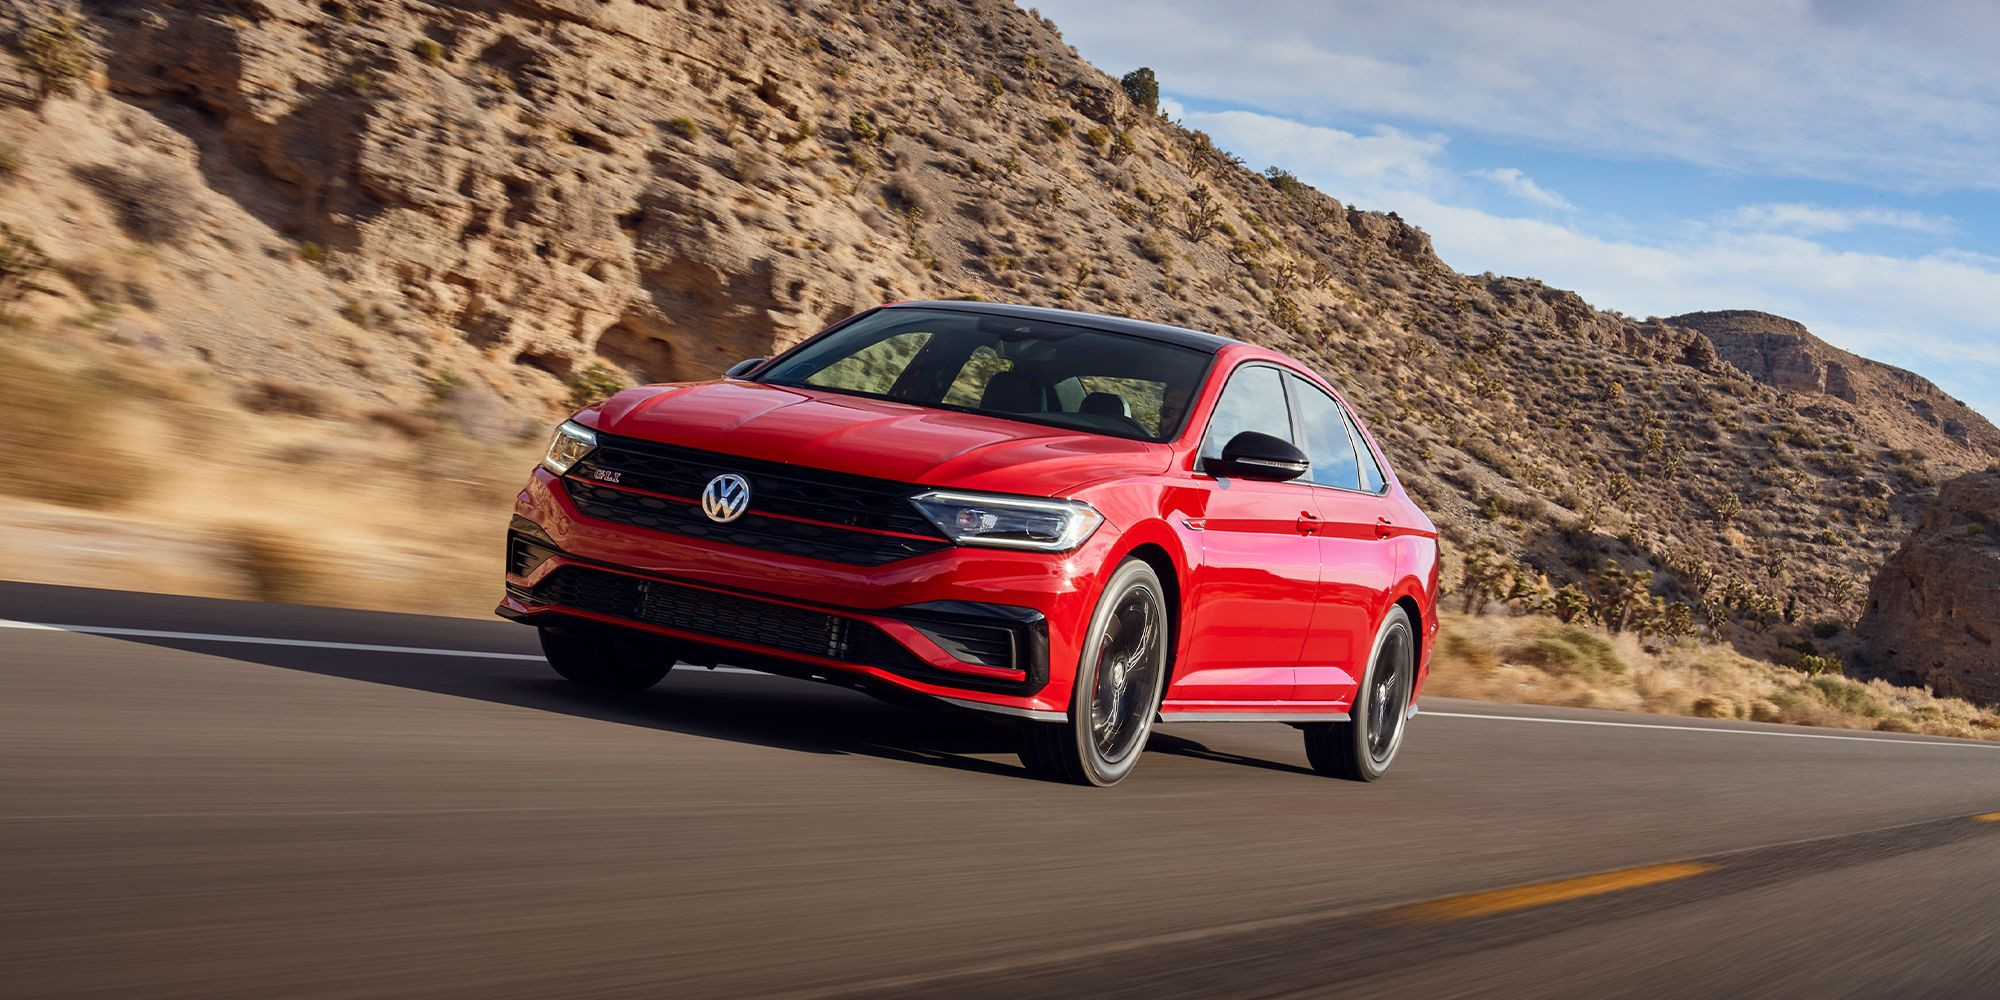 The front of the Jetta GLI on the move